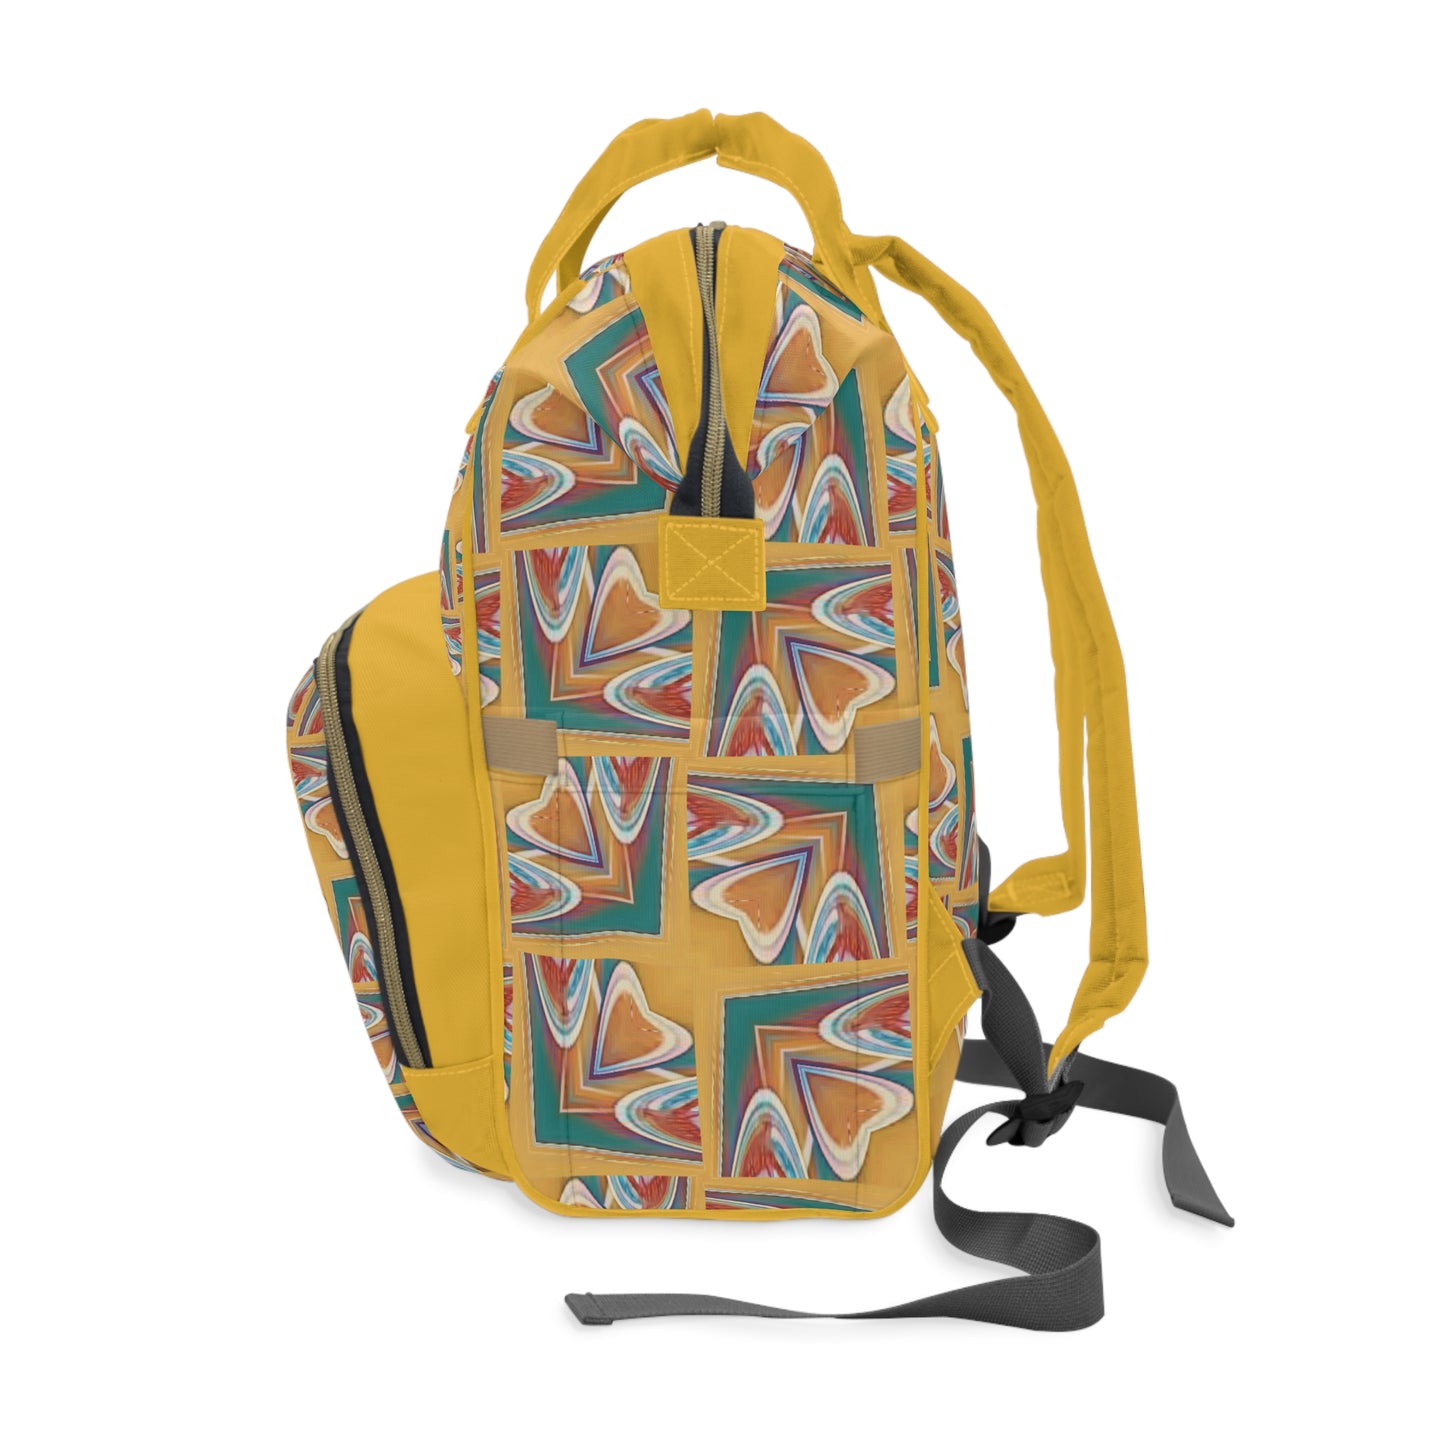 Have a Heart Yellow Multicolored Art to Wear Print Multifunctional Diaper Backpack